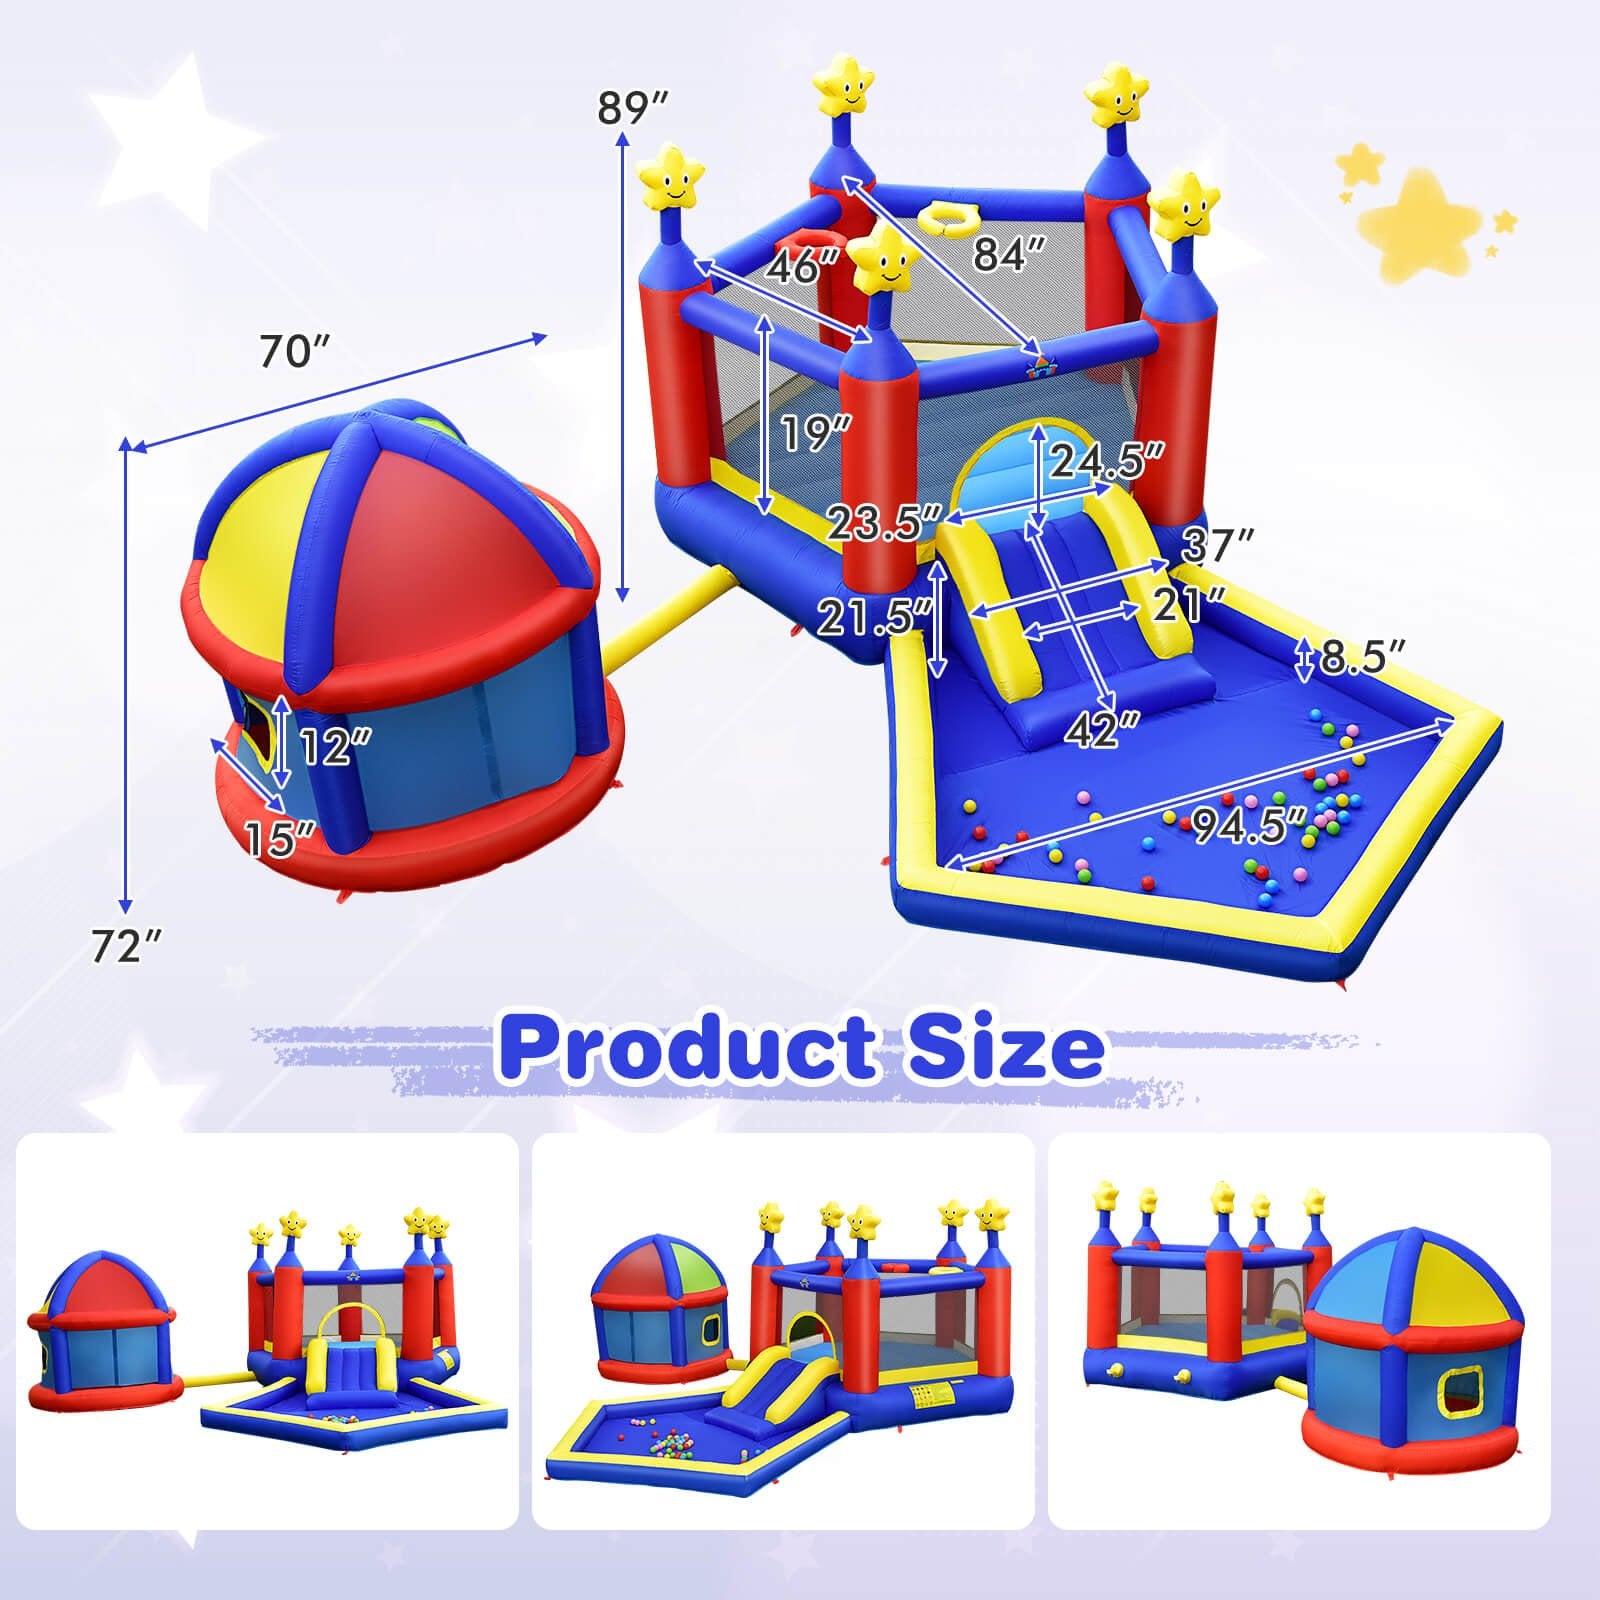 Kids Inflatable Bouncy Castle with Slide Large Jumping Area Playhouse and 735W Blower - Gallery Canada